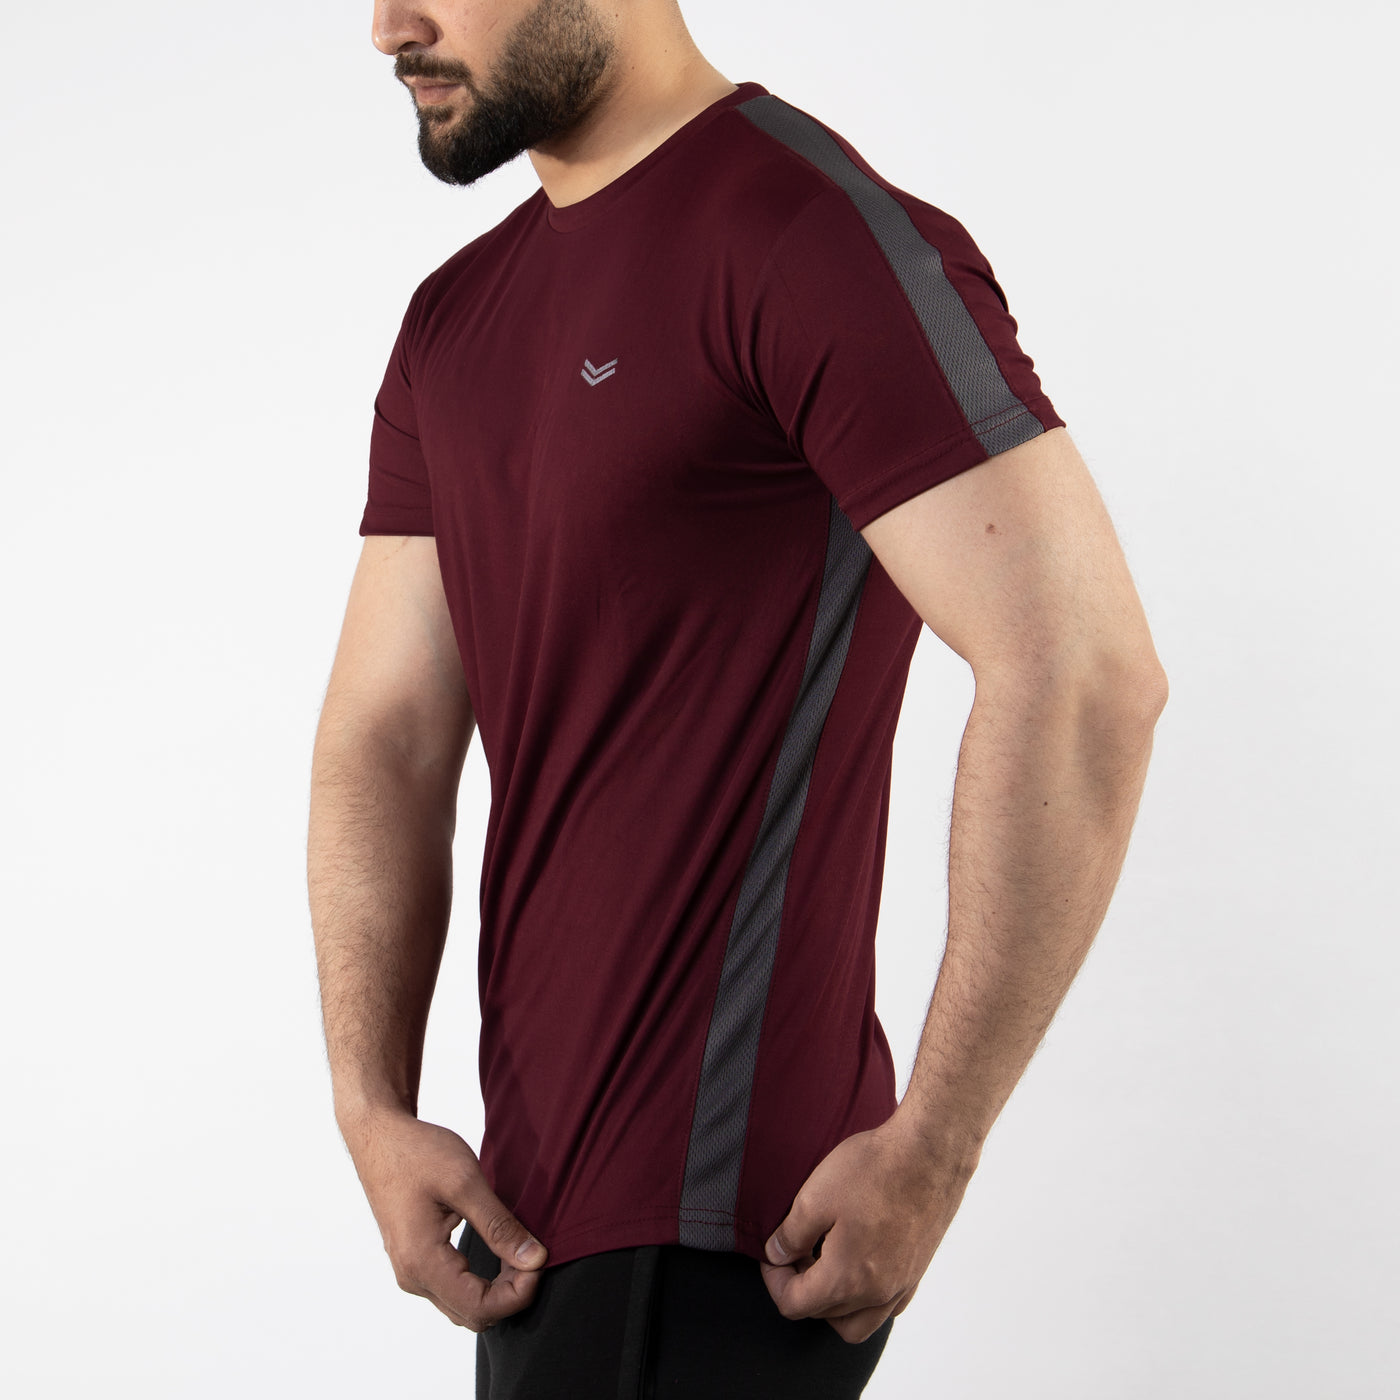 Maroon Hybrid Series Quick Dry T-Shirt with Gray Mesh Panels